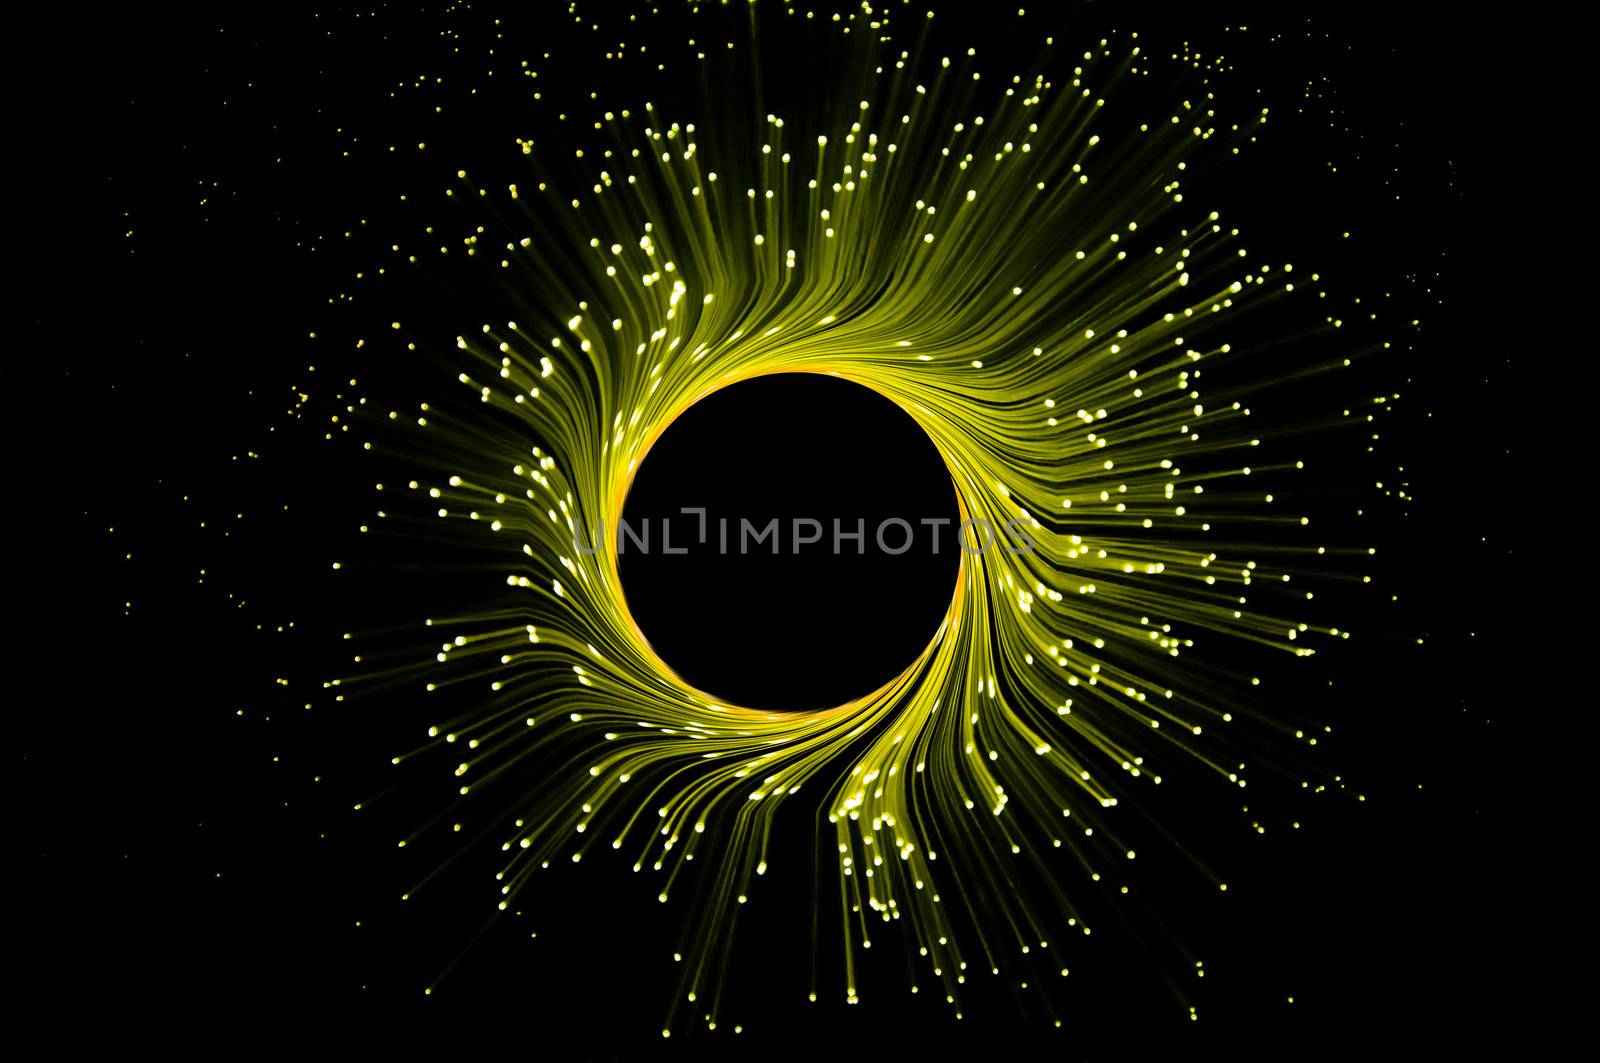 Many illuminated yellow fiber optic light strands in ring formation against black background